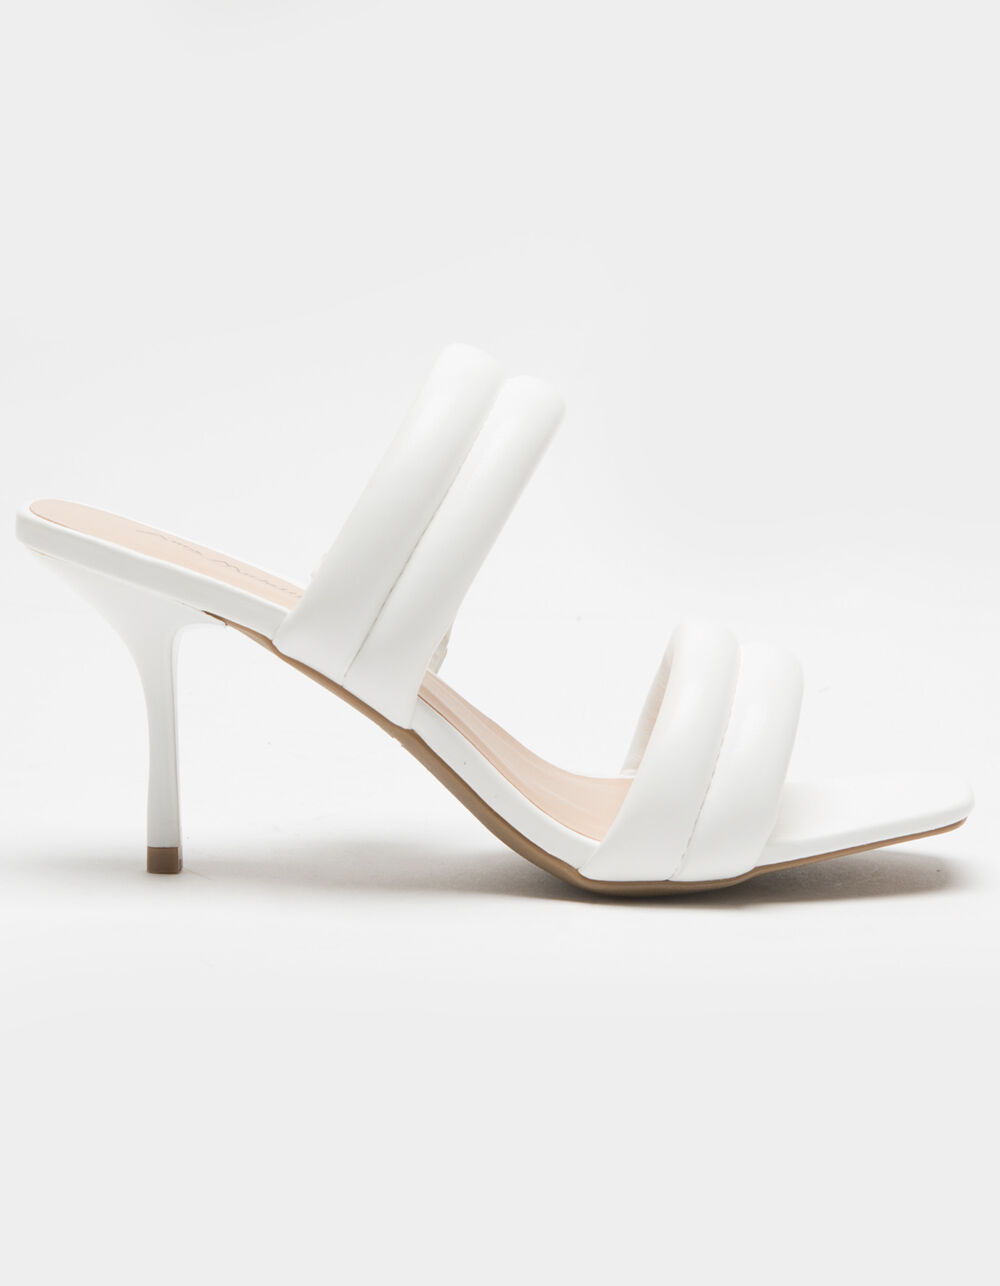 BAMBOO Quilted Mule Kitten Heels - WHITE | Tillys